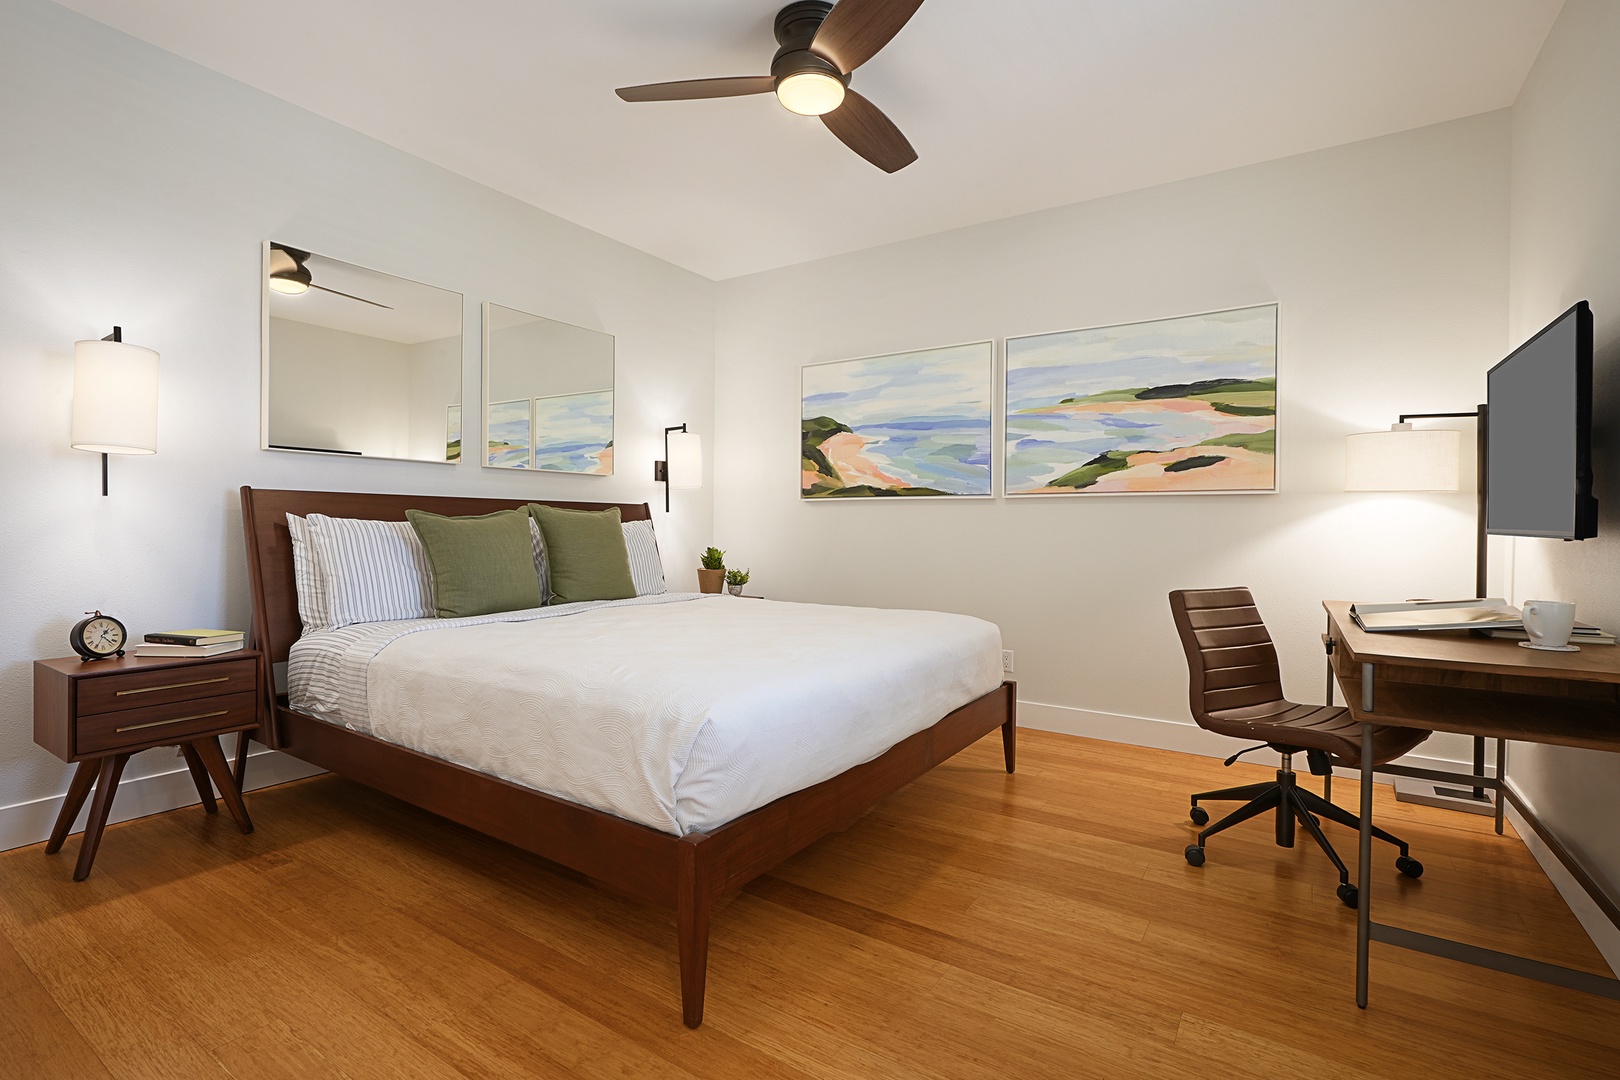 Koloa Vacation Rentals, Pili Mai 11K - Guest Bedroom 2 has a king bed, garden views, and ensuite bathroom